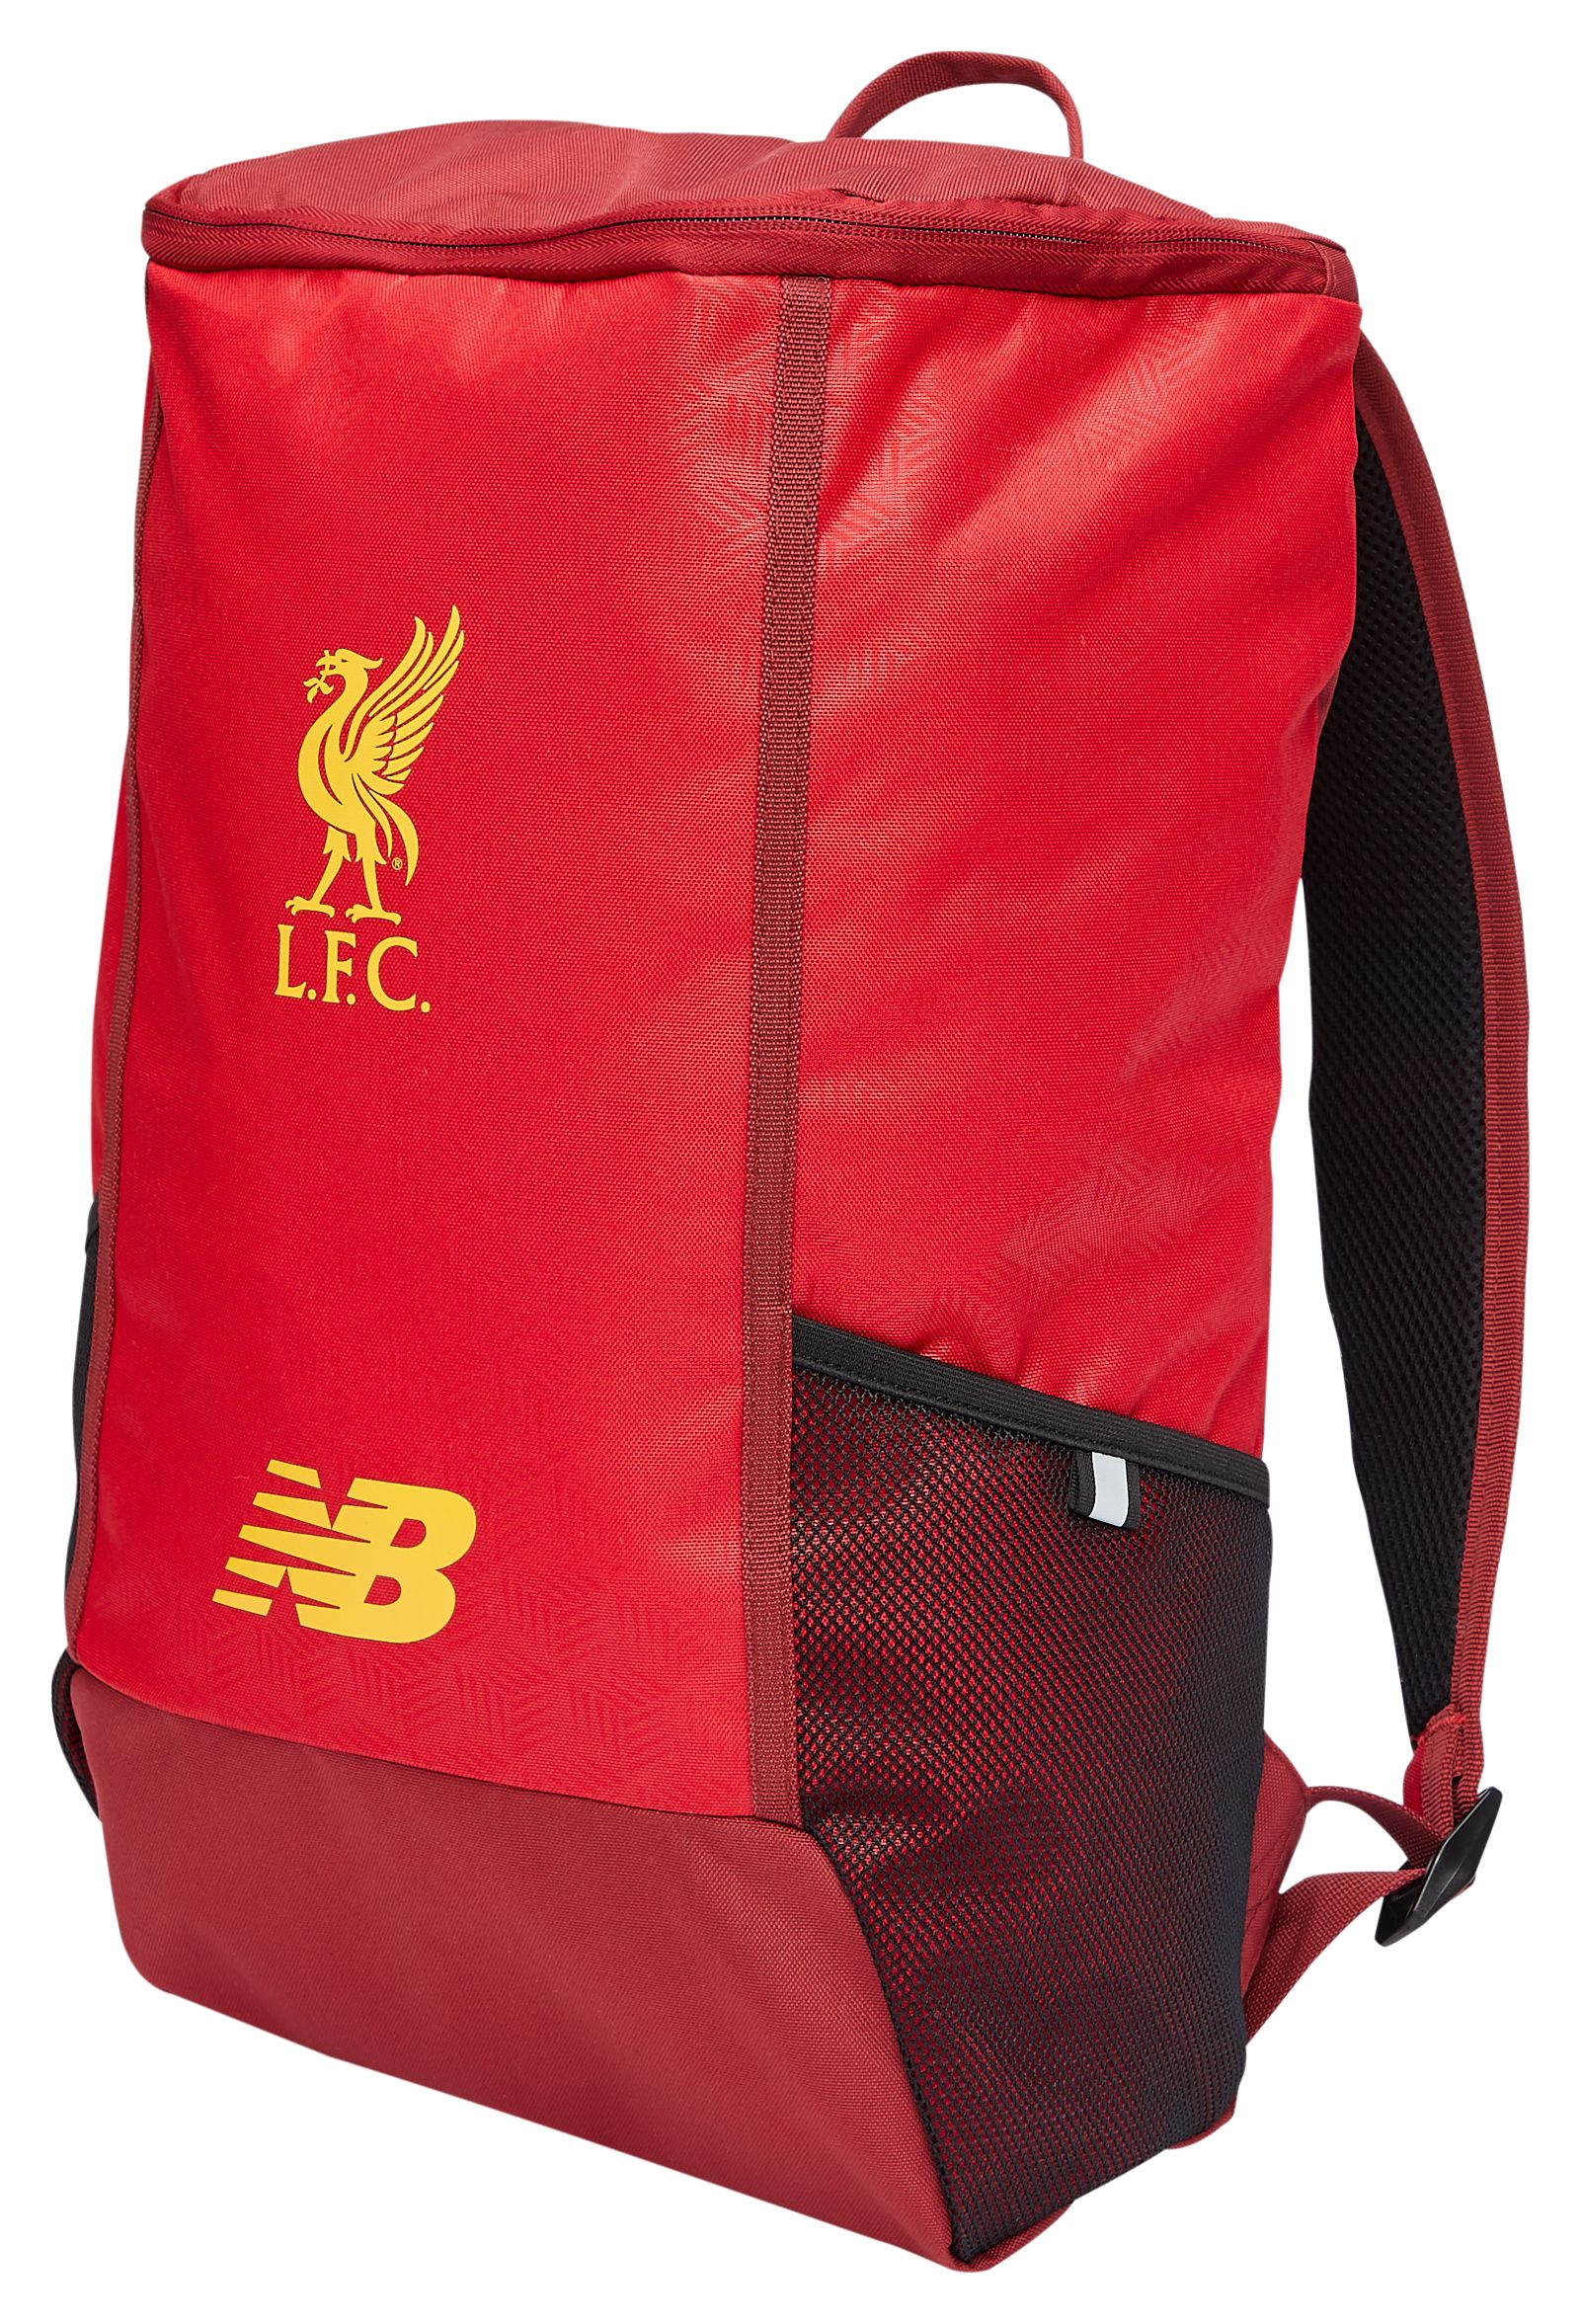 liverpool fc backpack